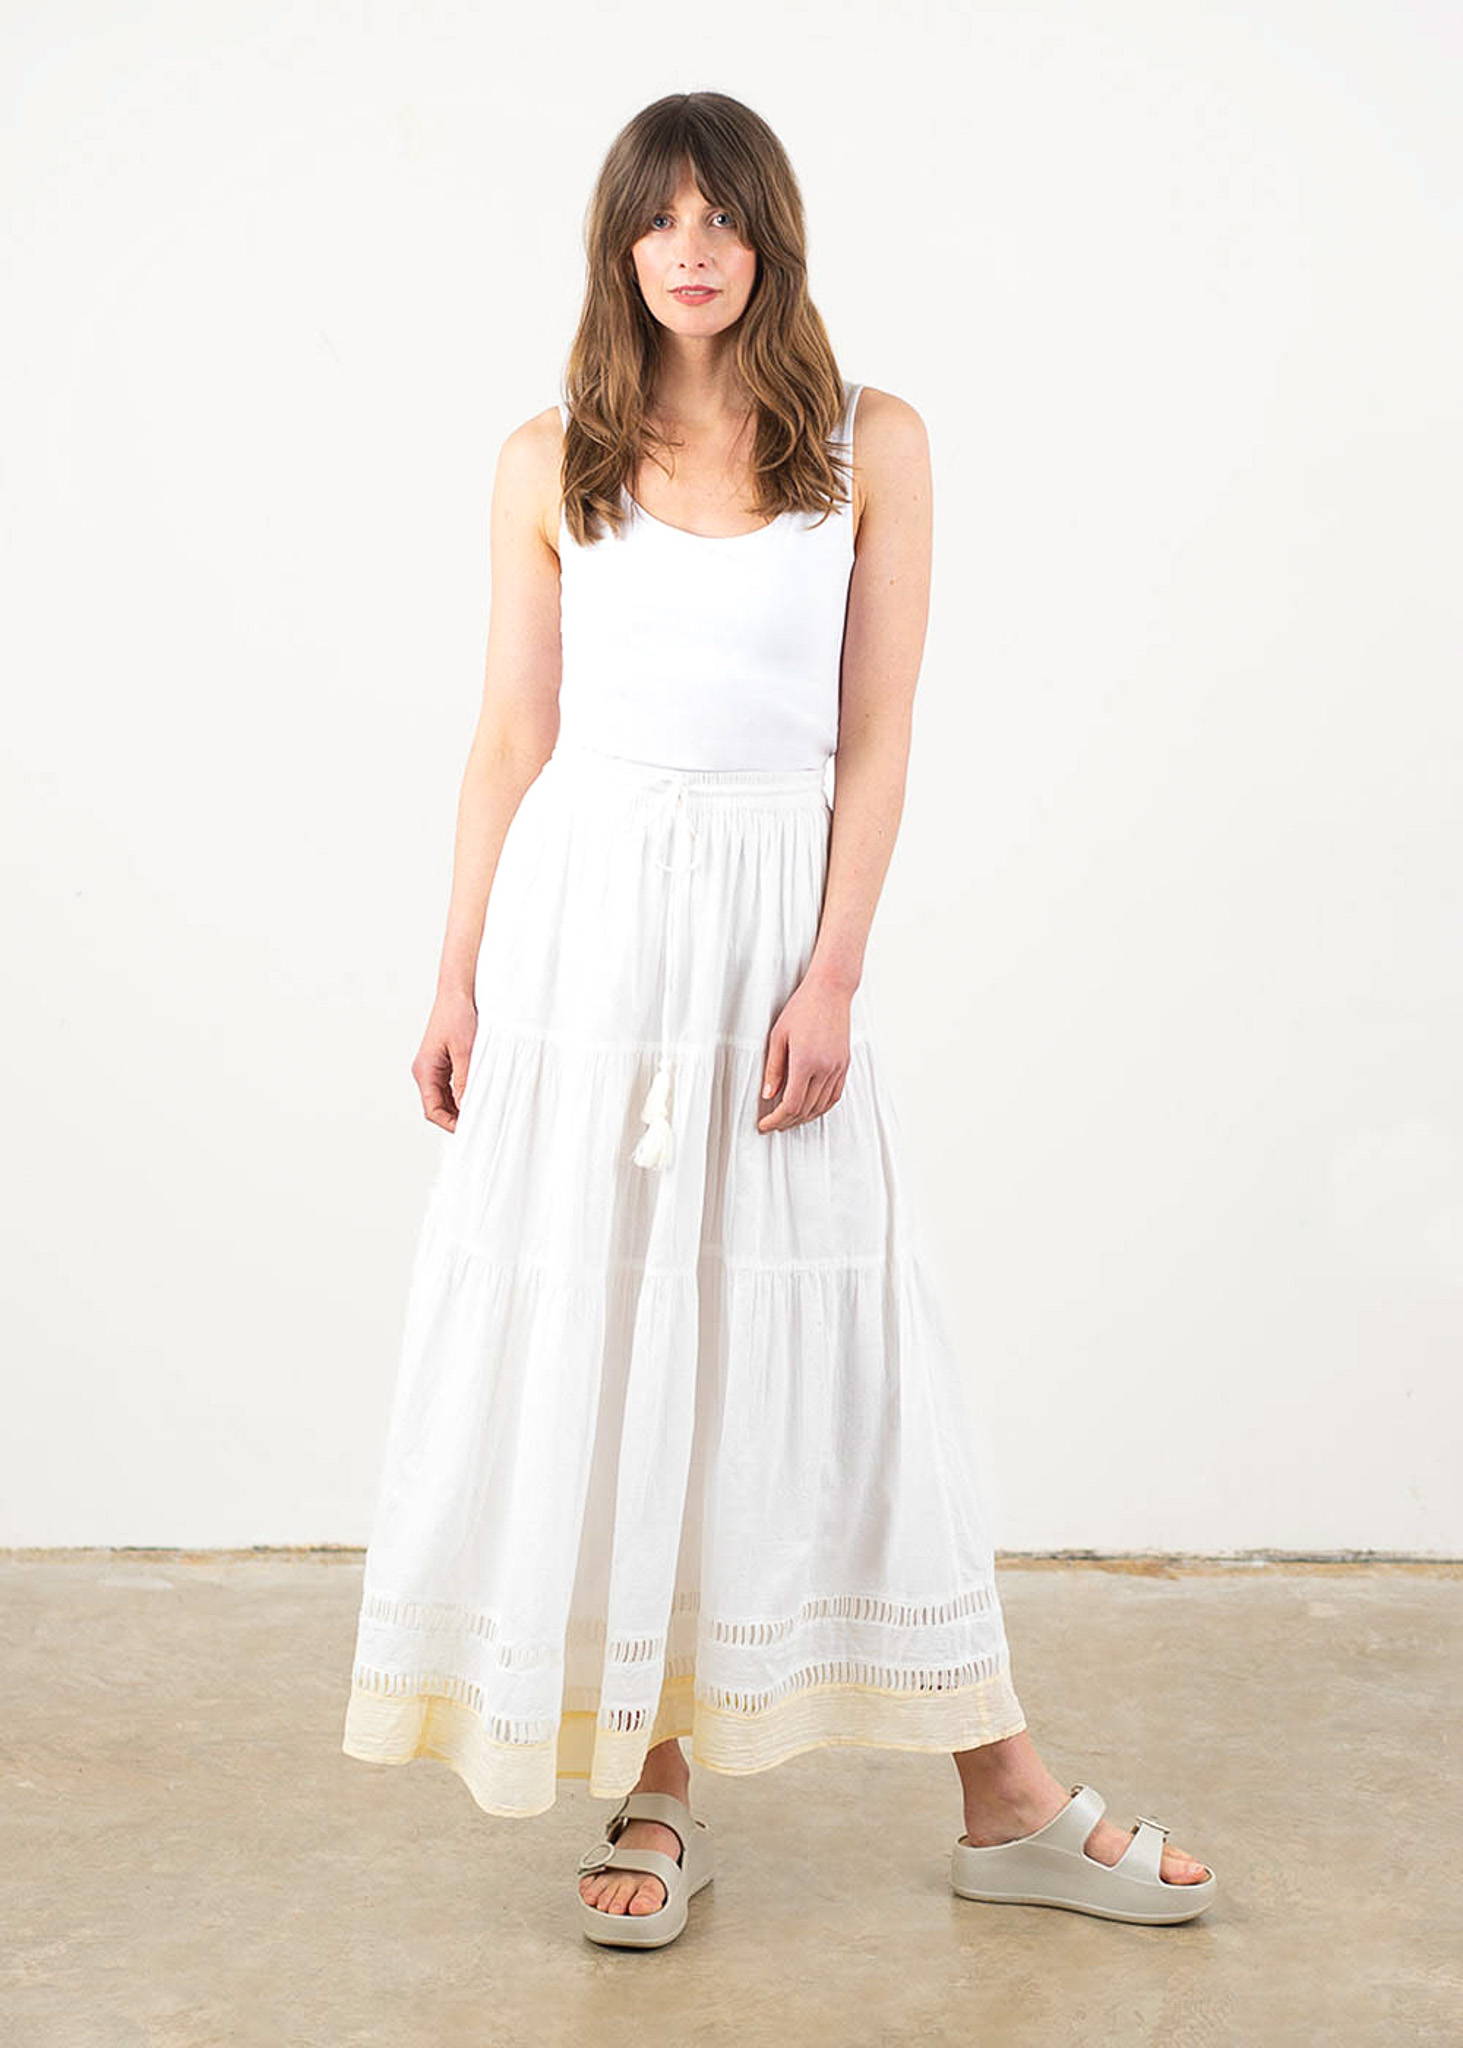 A model wearing a white strappy vest with a tiered white boho style skirt and off white chunky platform slides